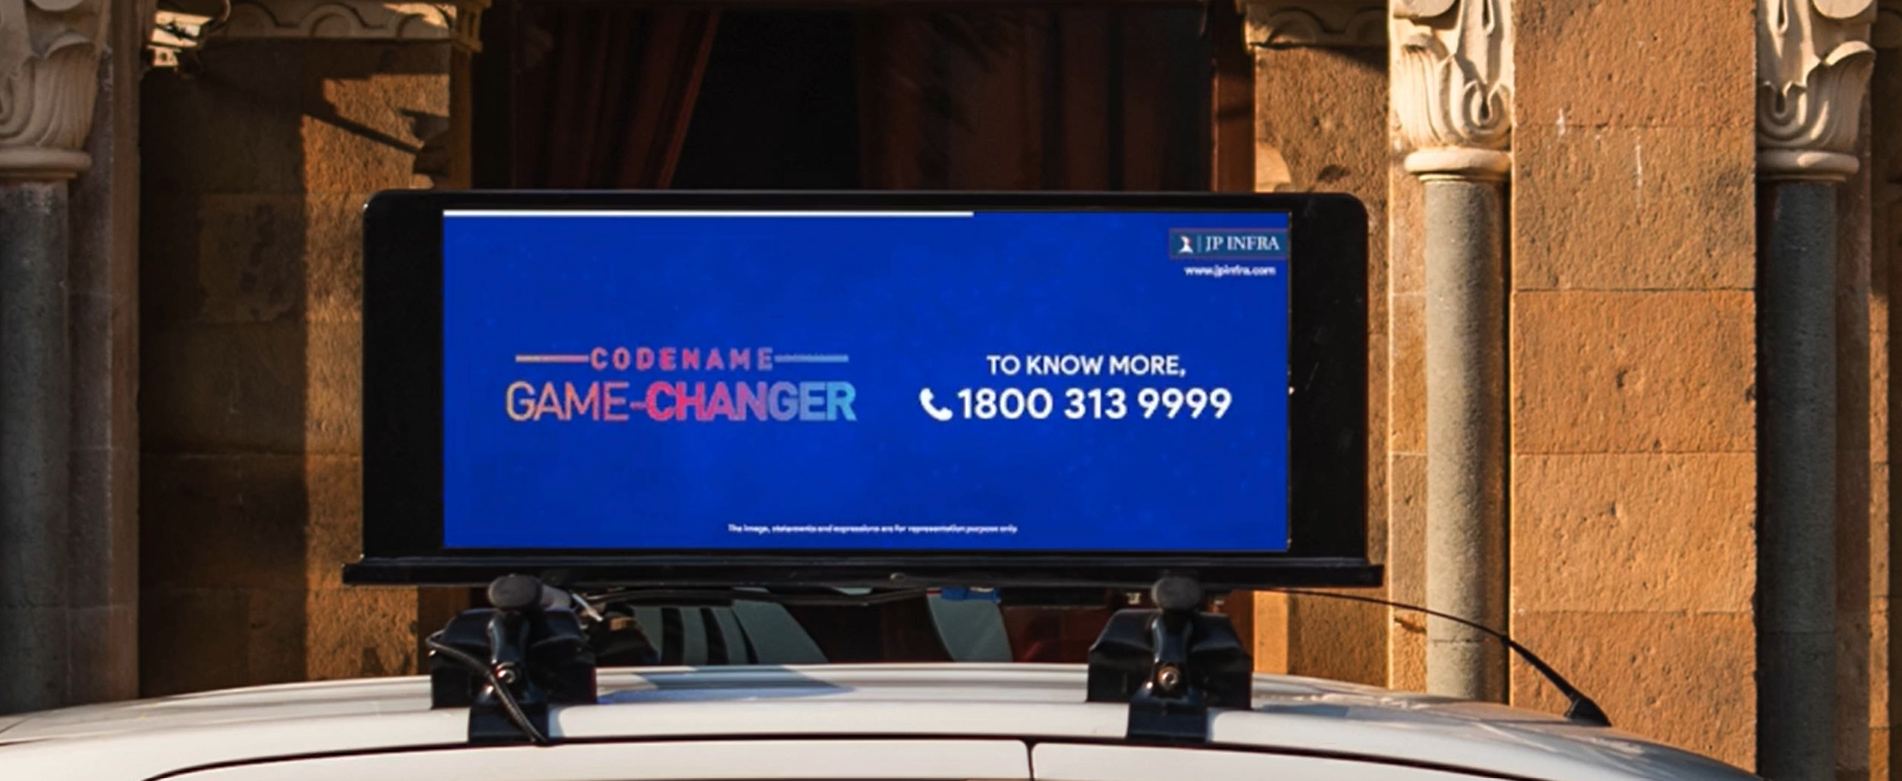 JP Infra's Taxi Top Digital Screen Advertising Campaign with LytAds